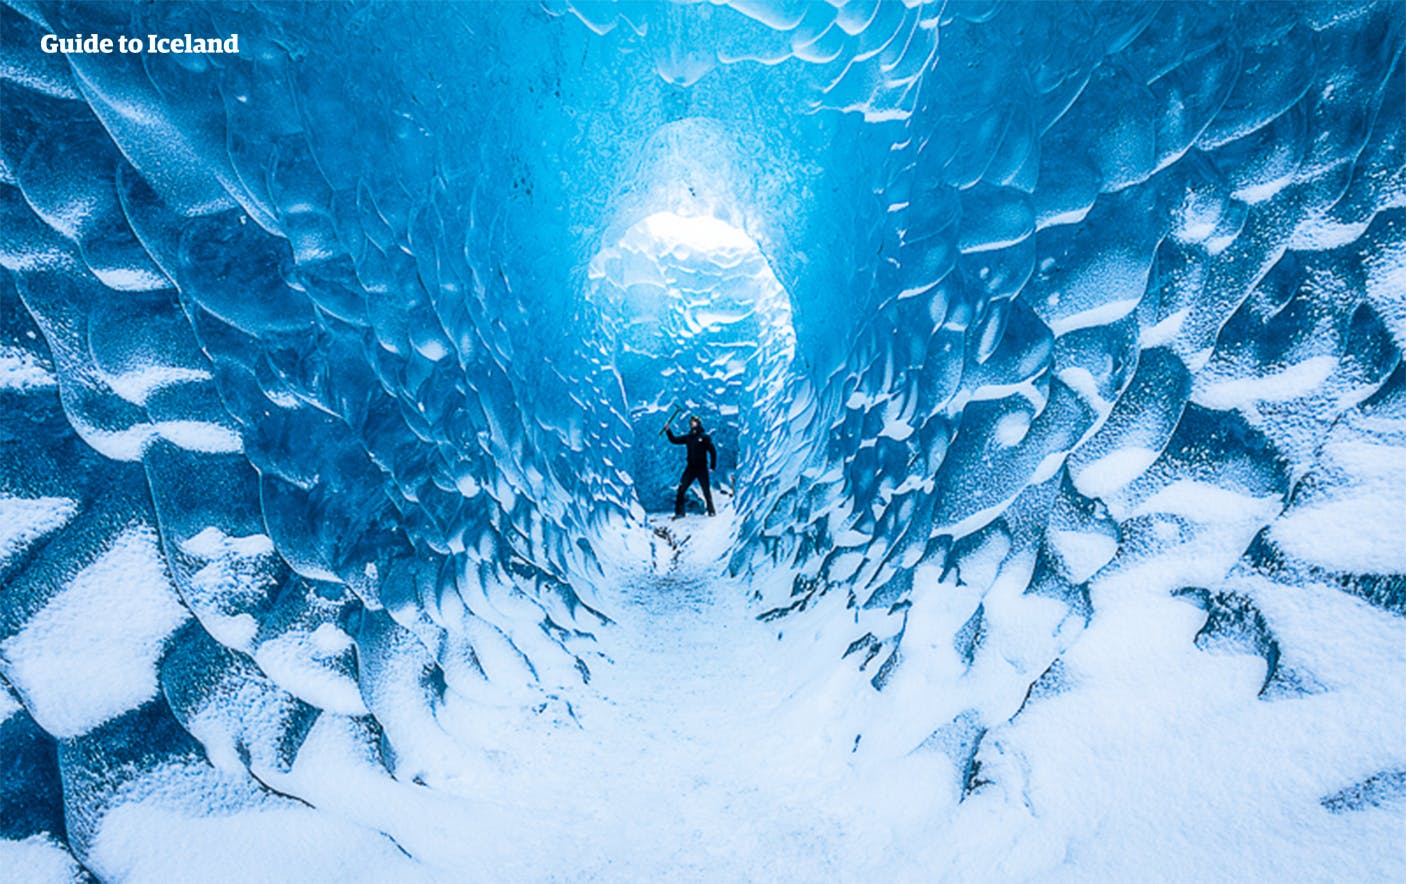 The blue ice cave inside Vatnajökull, Europe's largest glacier, is a true wonder of Iceland not many locals have even experienced.